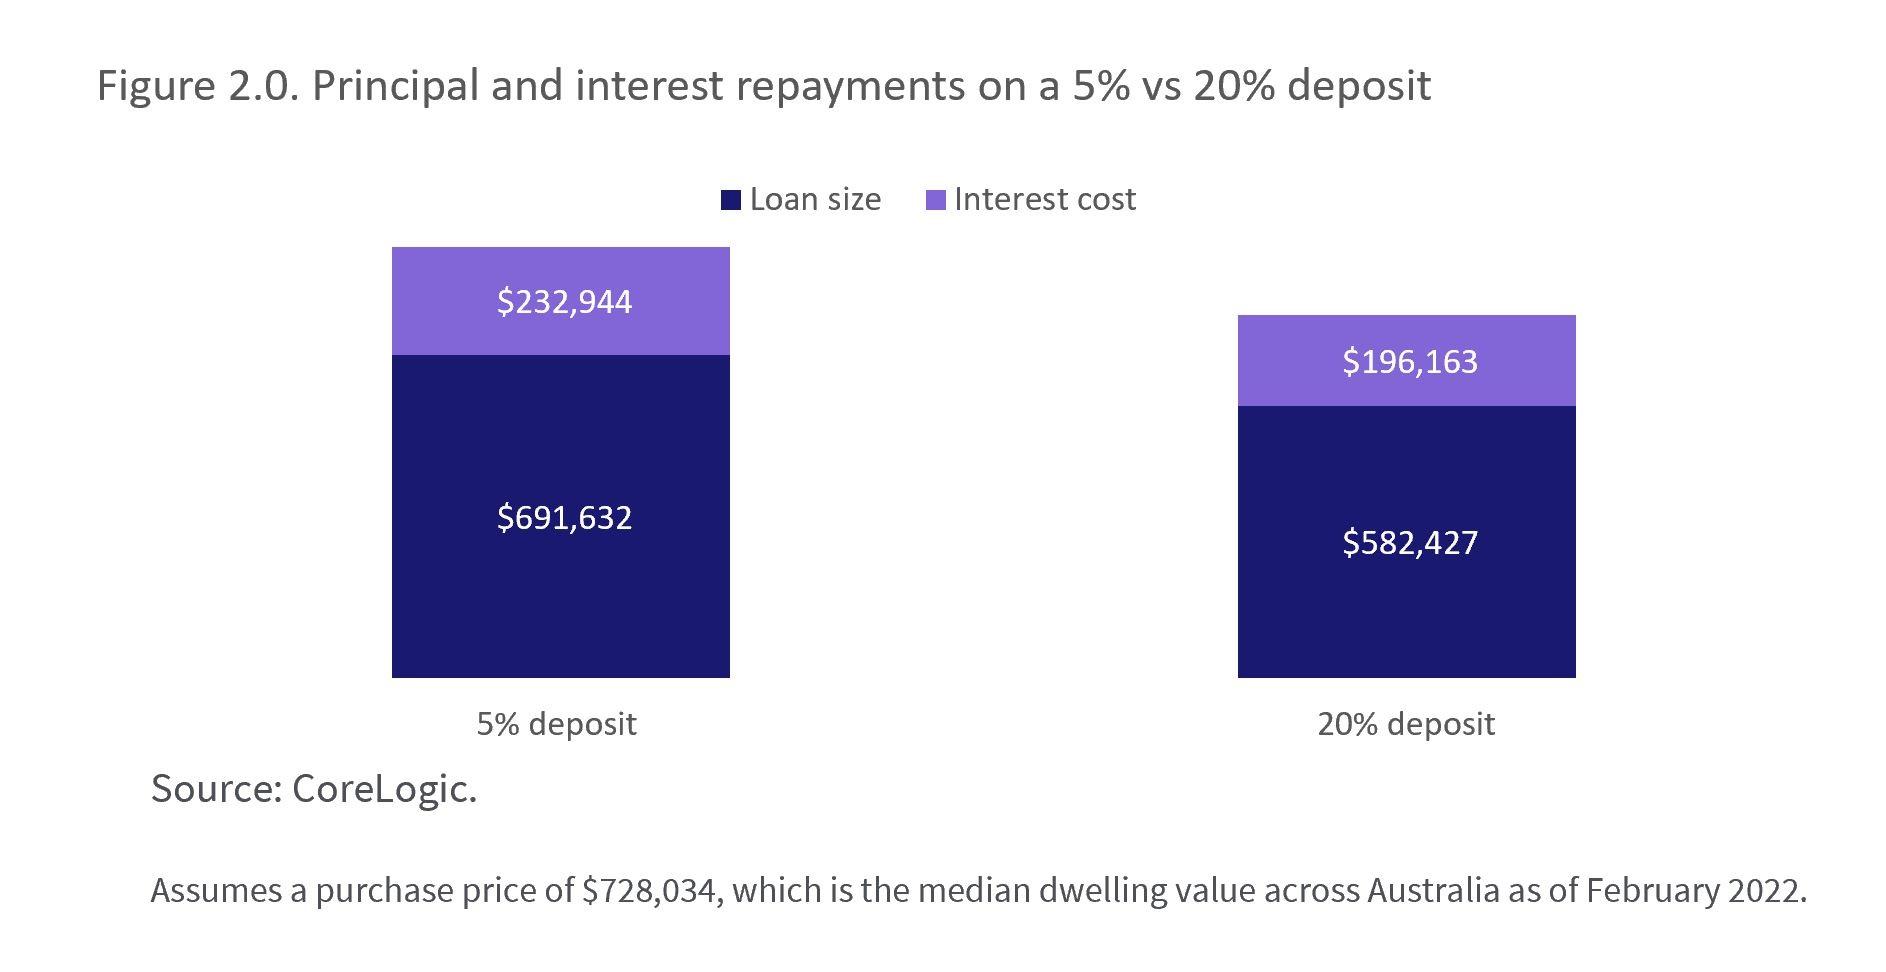 Principal and interest repayments on a 5% vs a 20% deposit